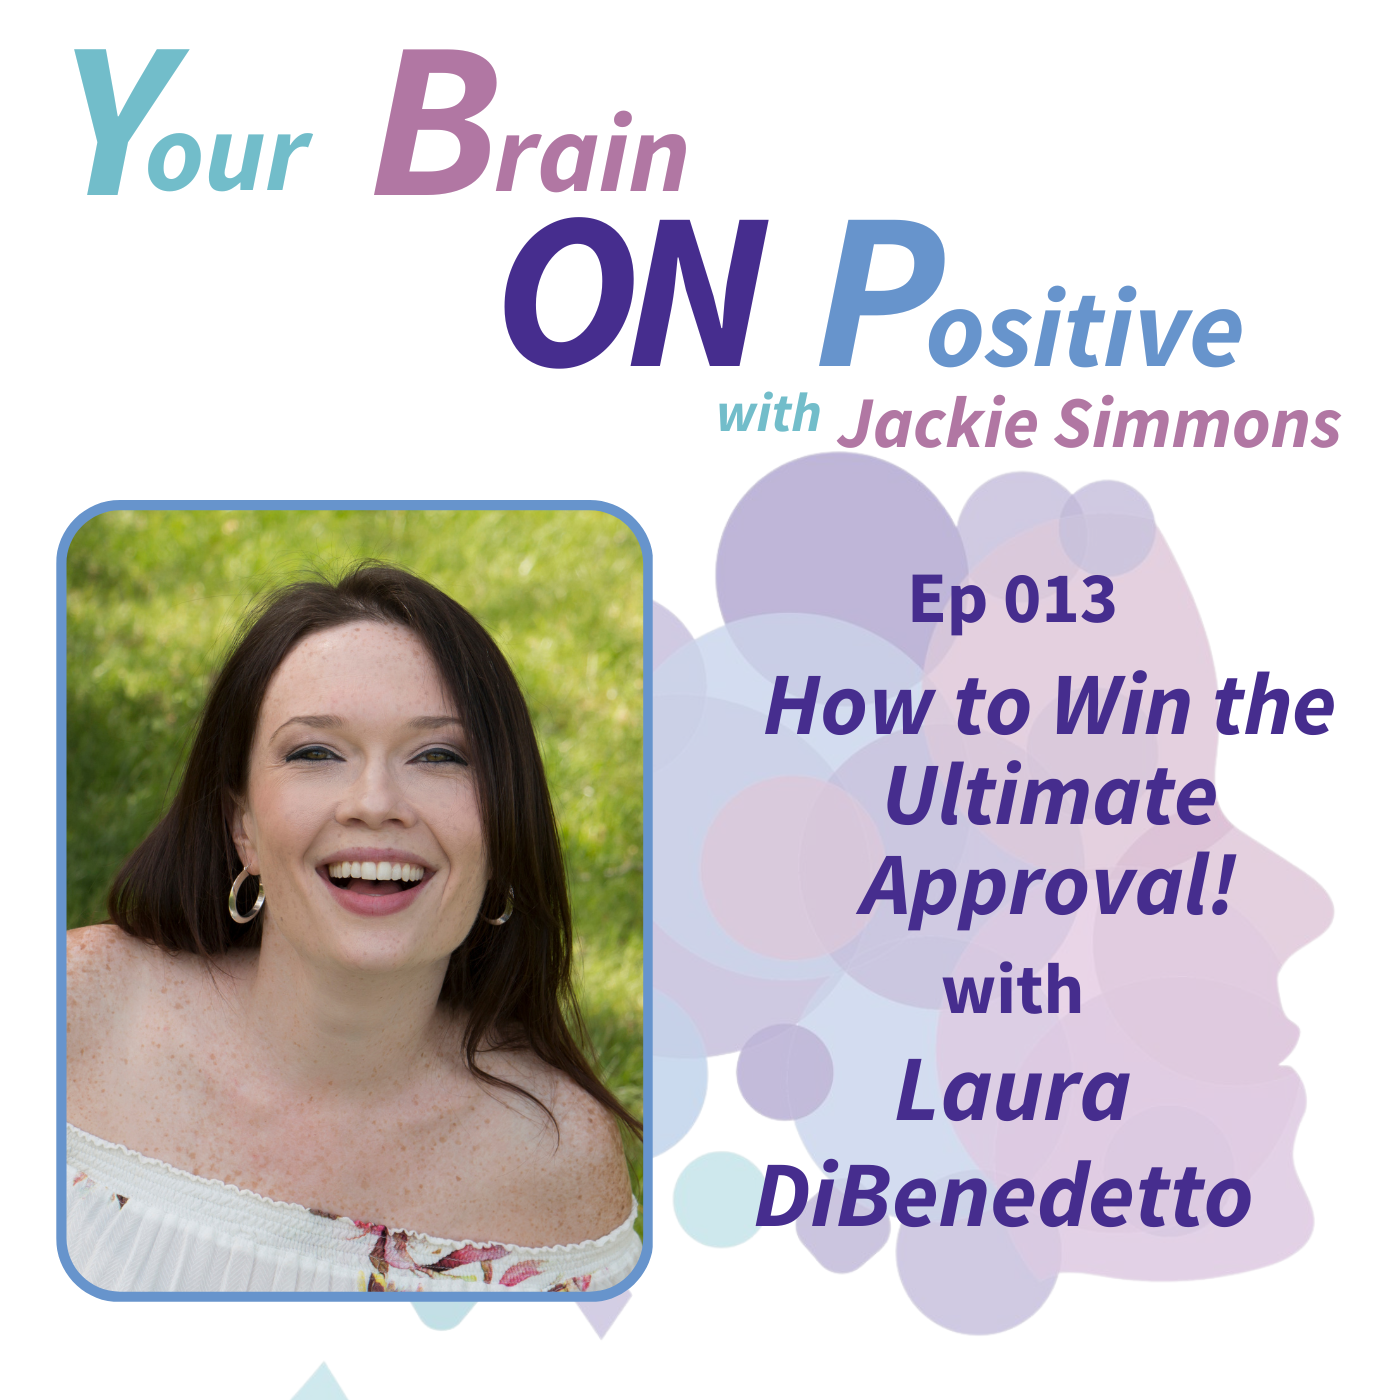 How to Win the Ultimate Approval! - Laura DiBenedetto